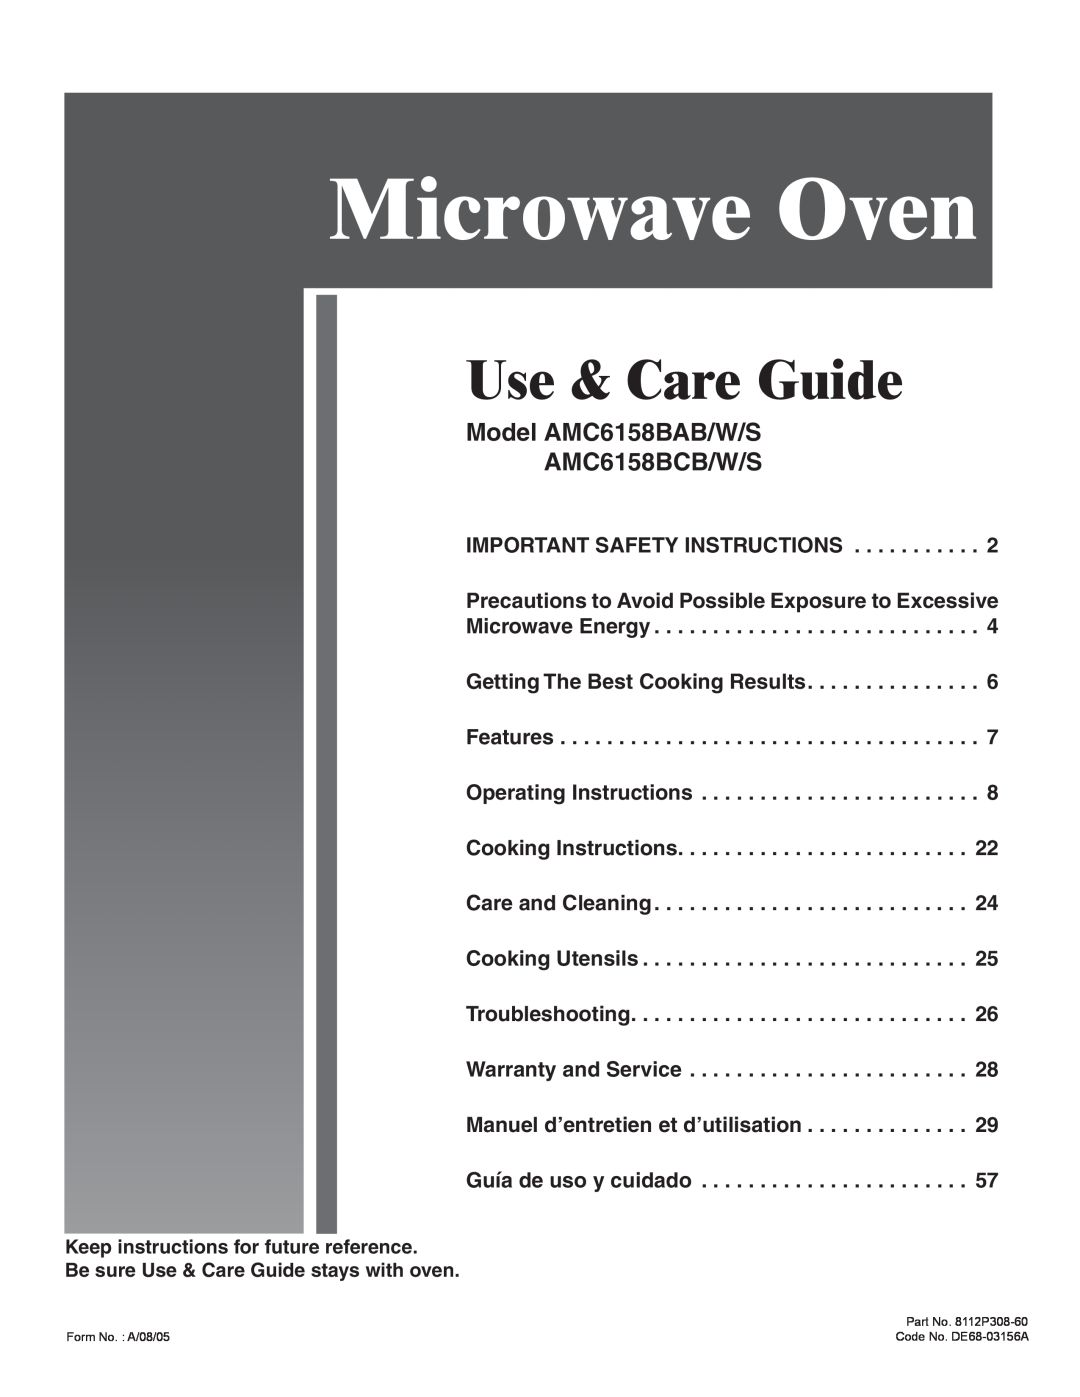 Amana important safety instructions Microwave Oven, Use & Care Guide, Model AMC6158BAB/W/S AMC6158BCB/W/S 